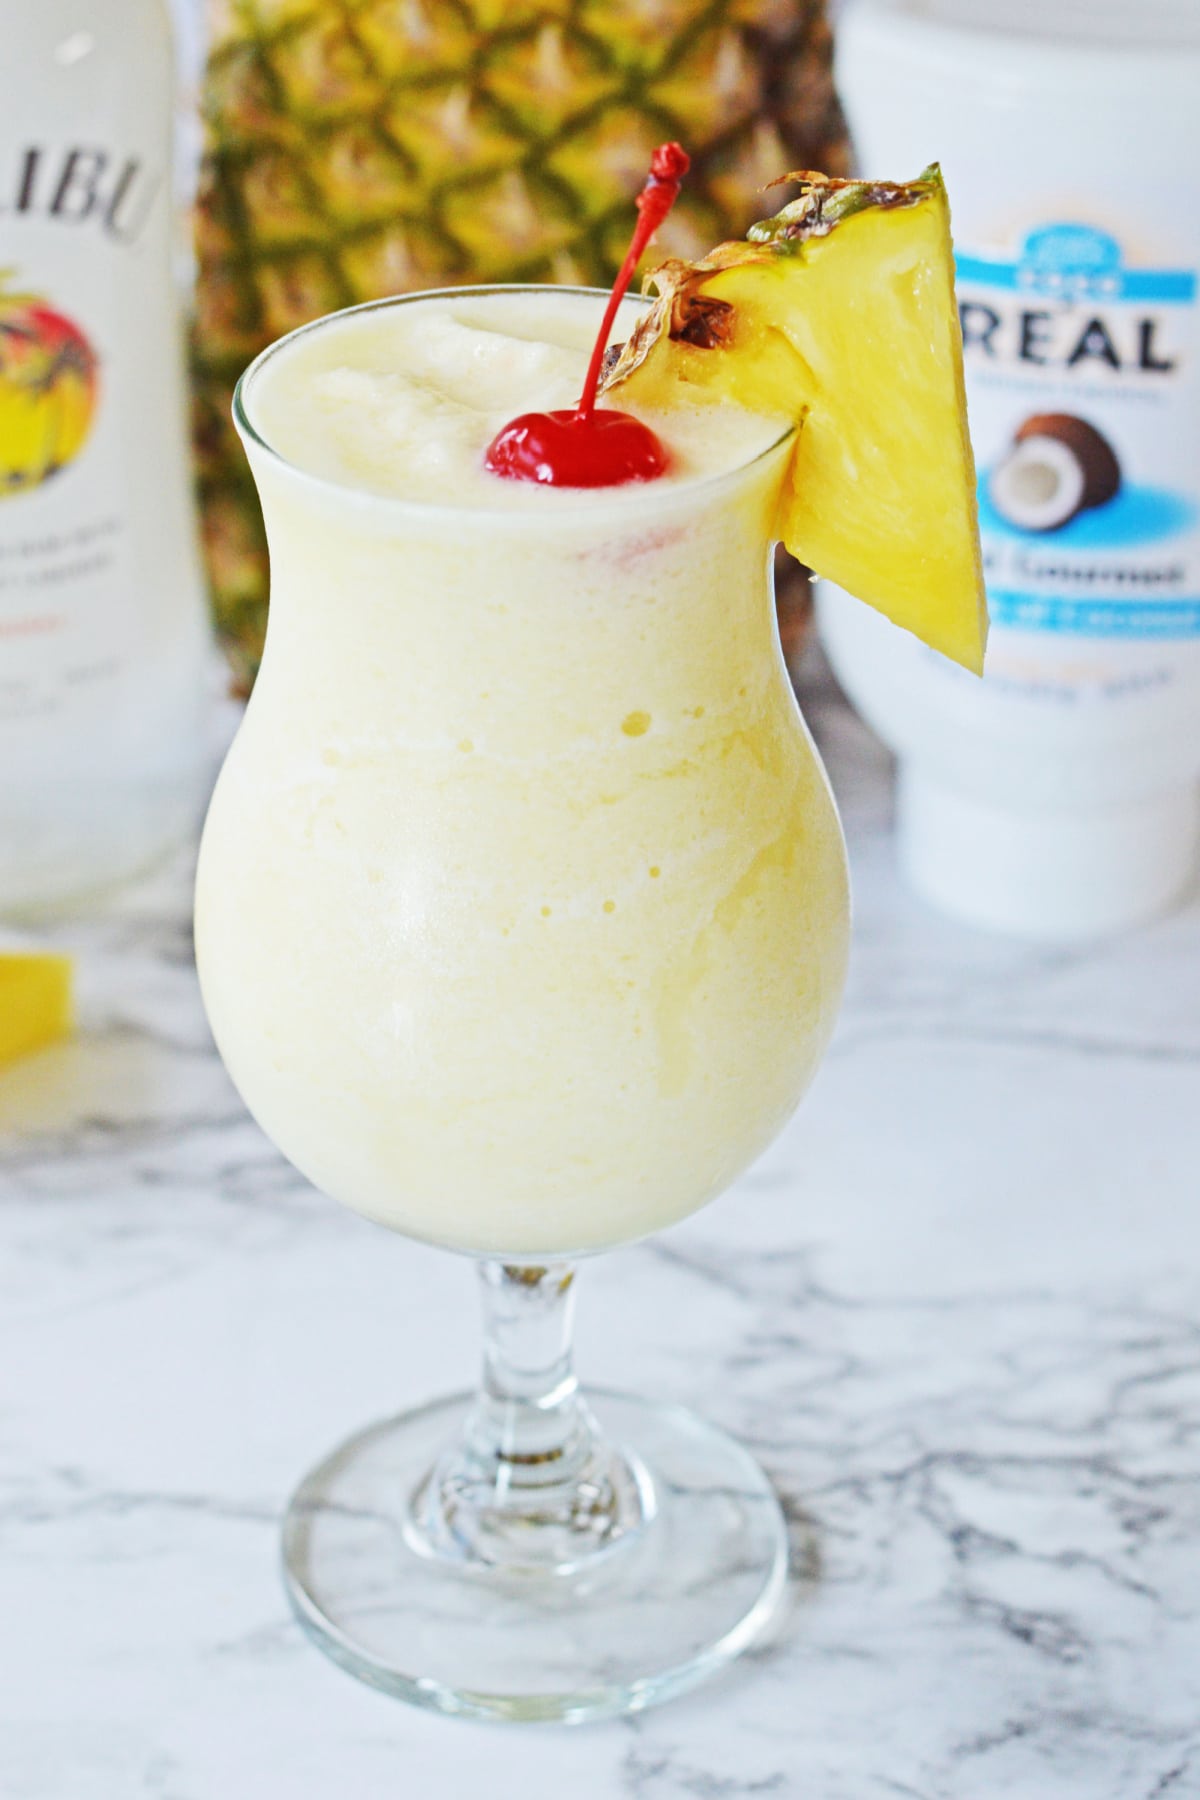 Pina Colada with cherry and pineapple